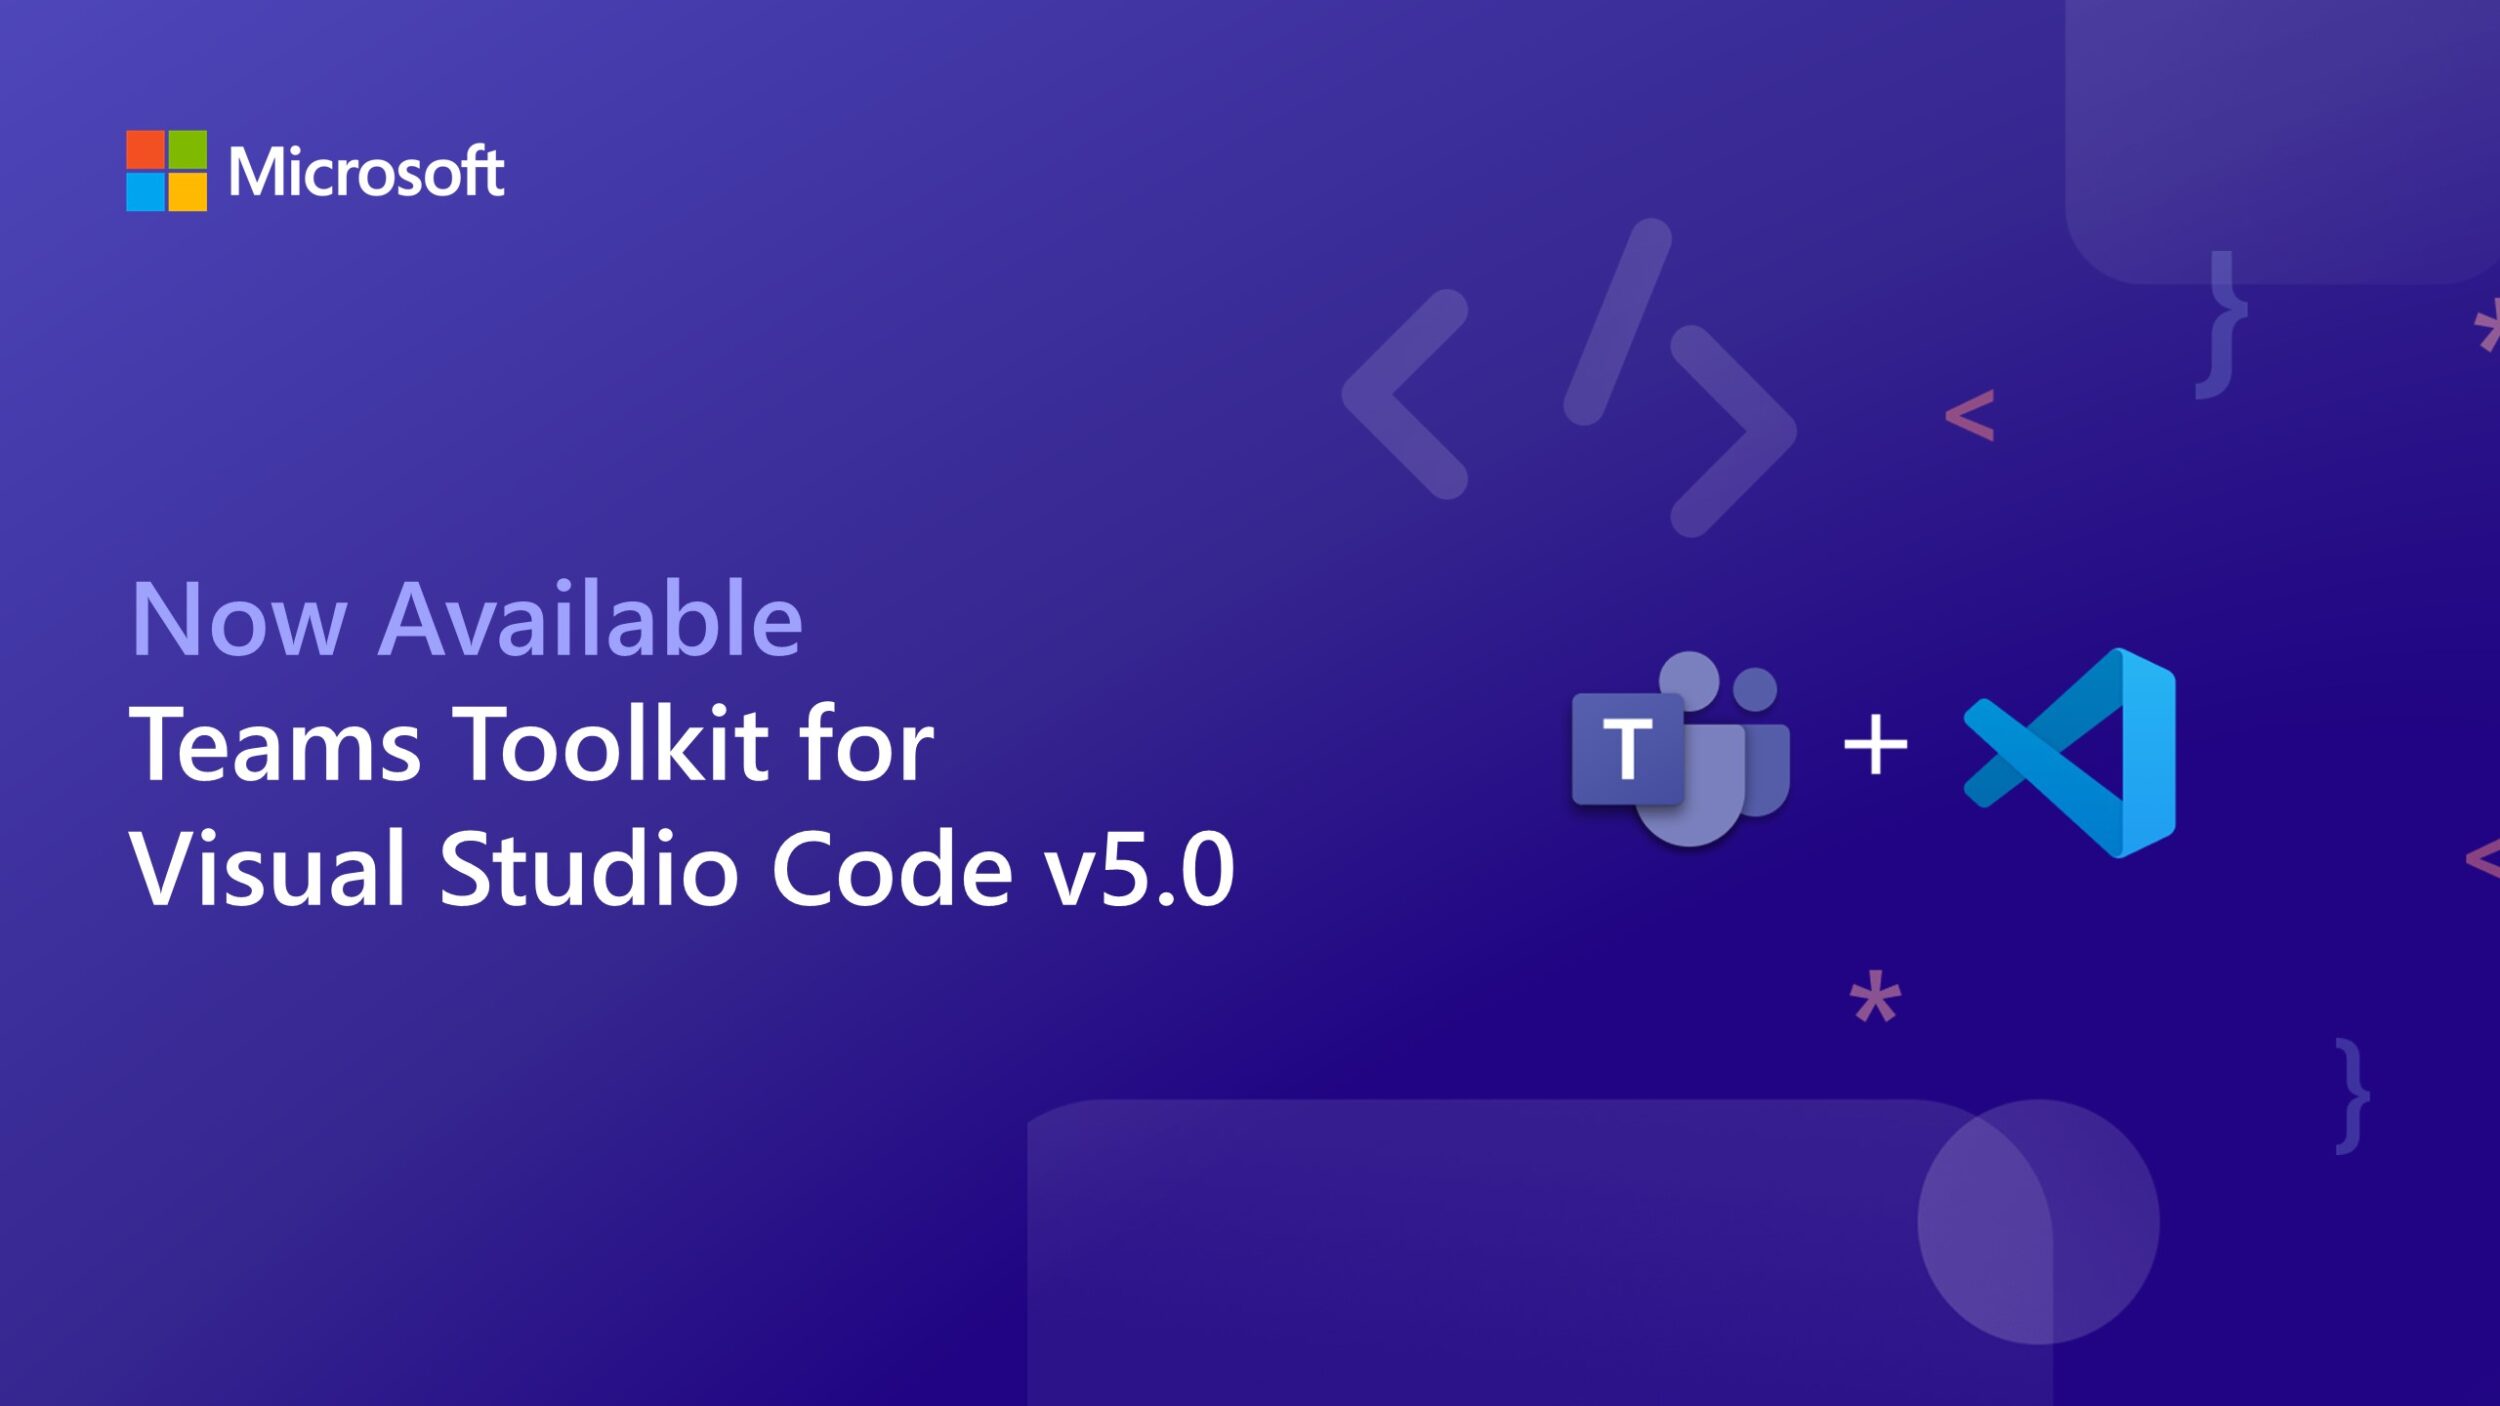 Teams Toolkit for Visual Studio Code 5 now available